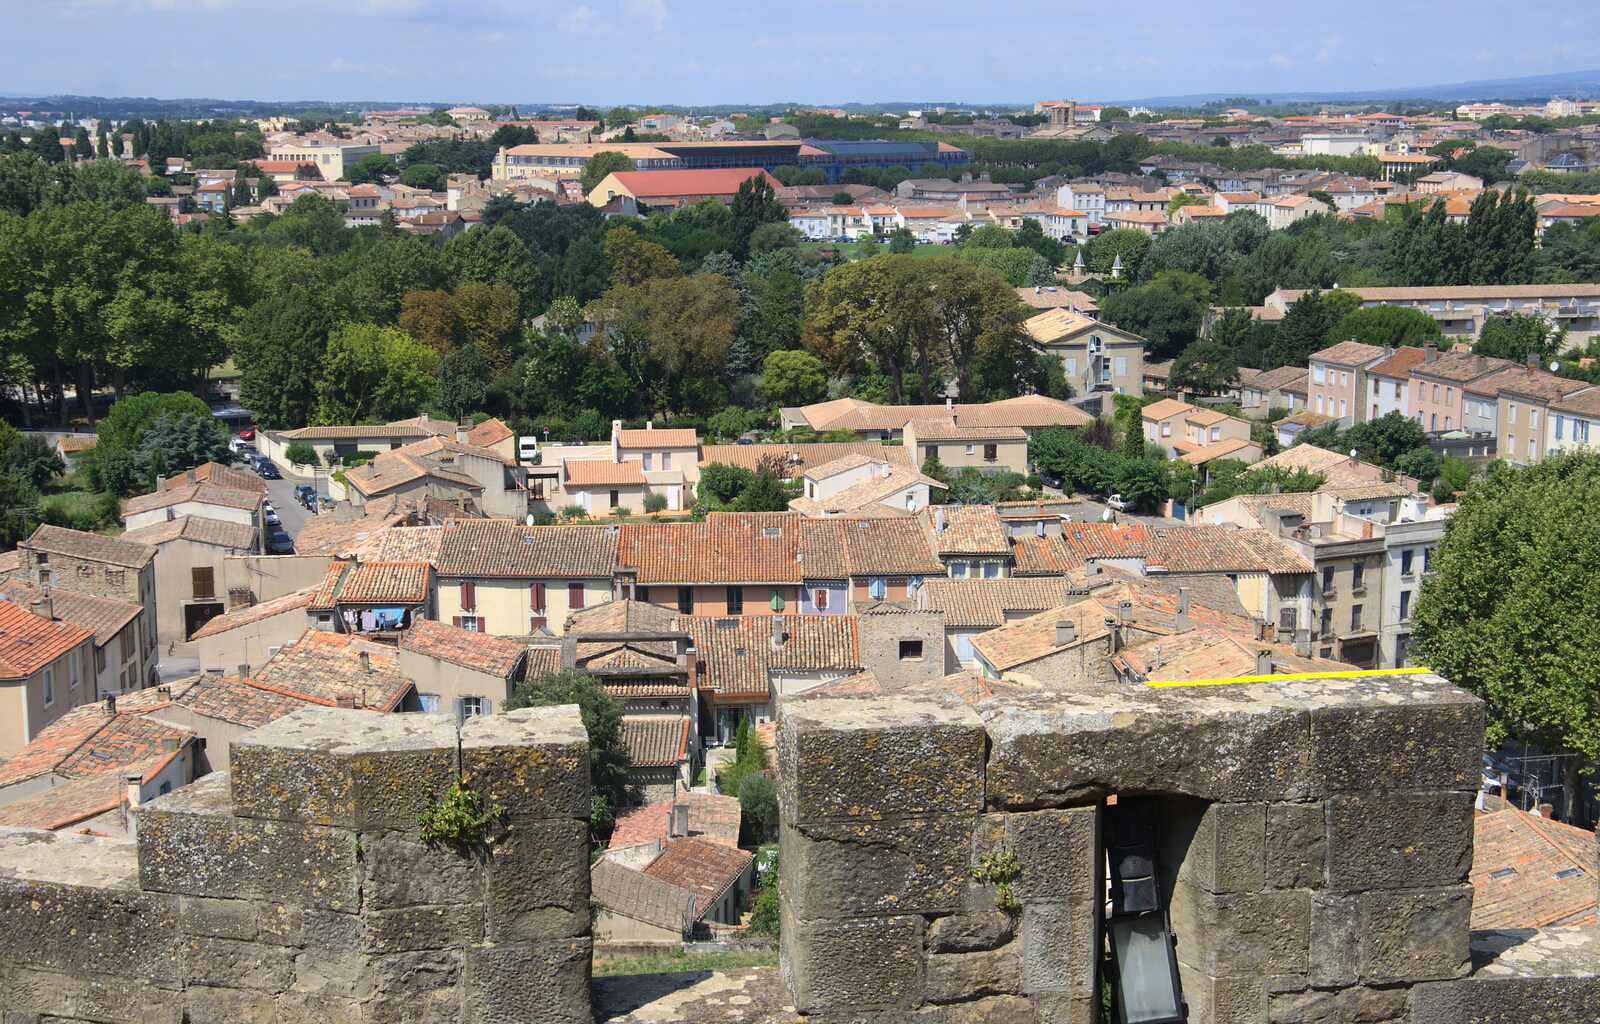 A view over the city walls from The Château Comtal, Lastours and the Journey Home, Carcassonne, Aude, France - 14th August 2018